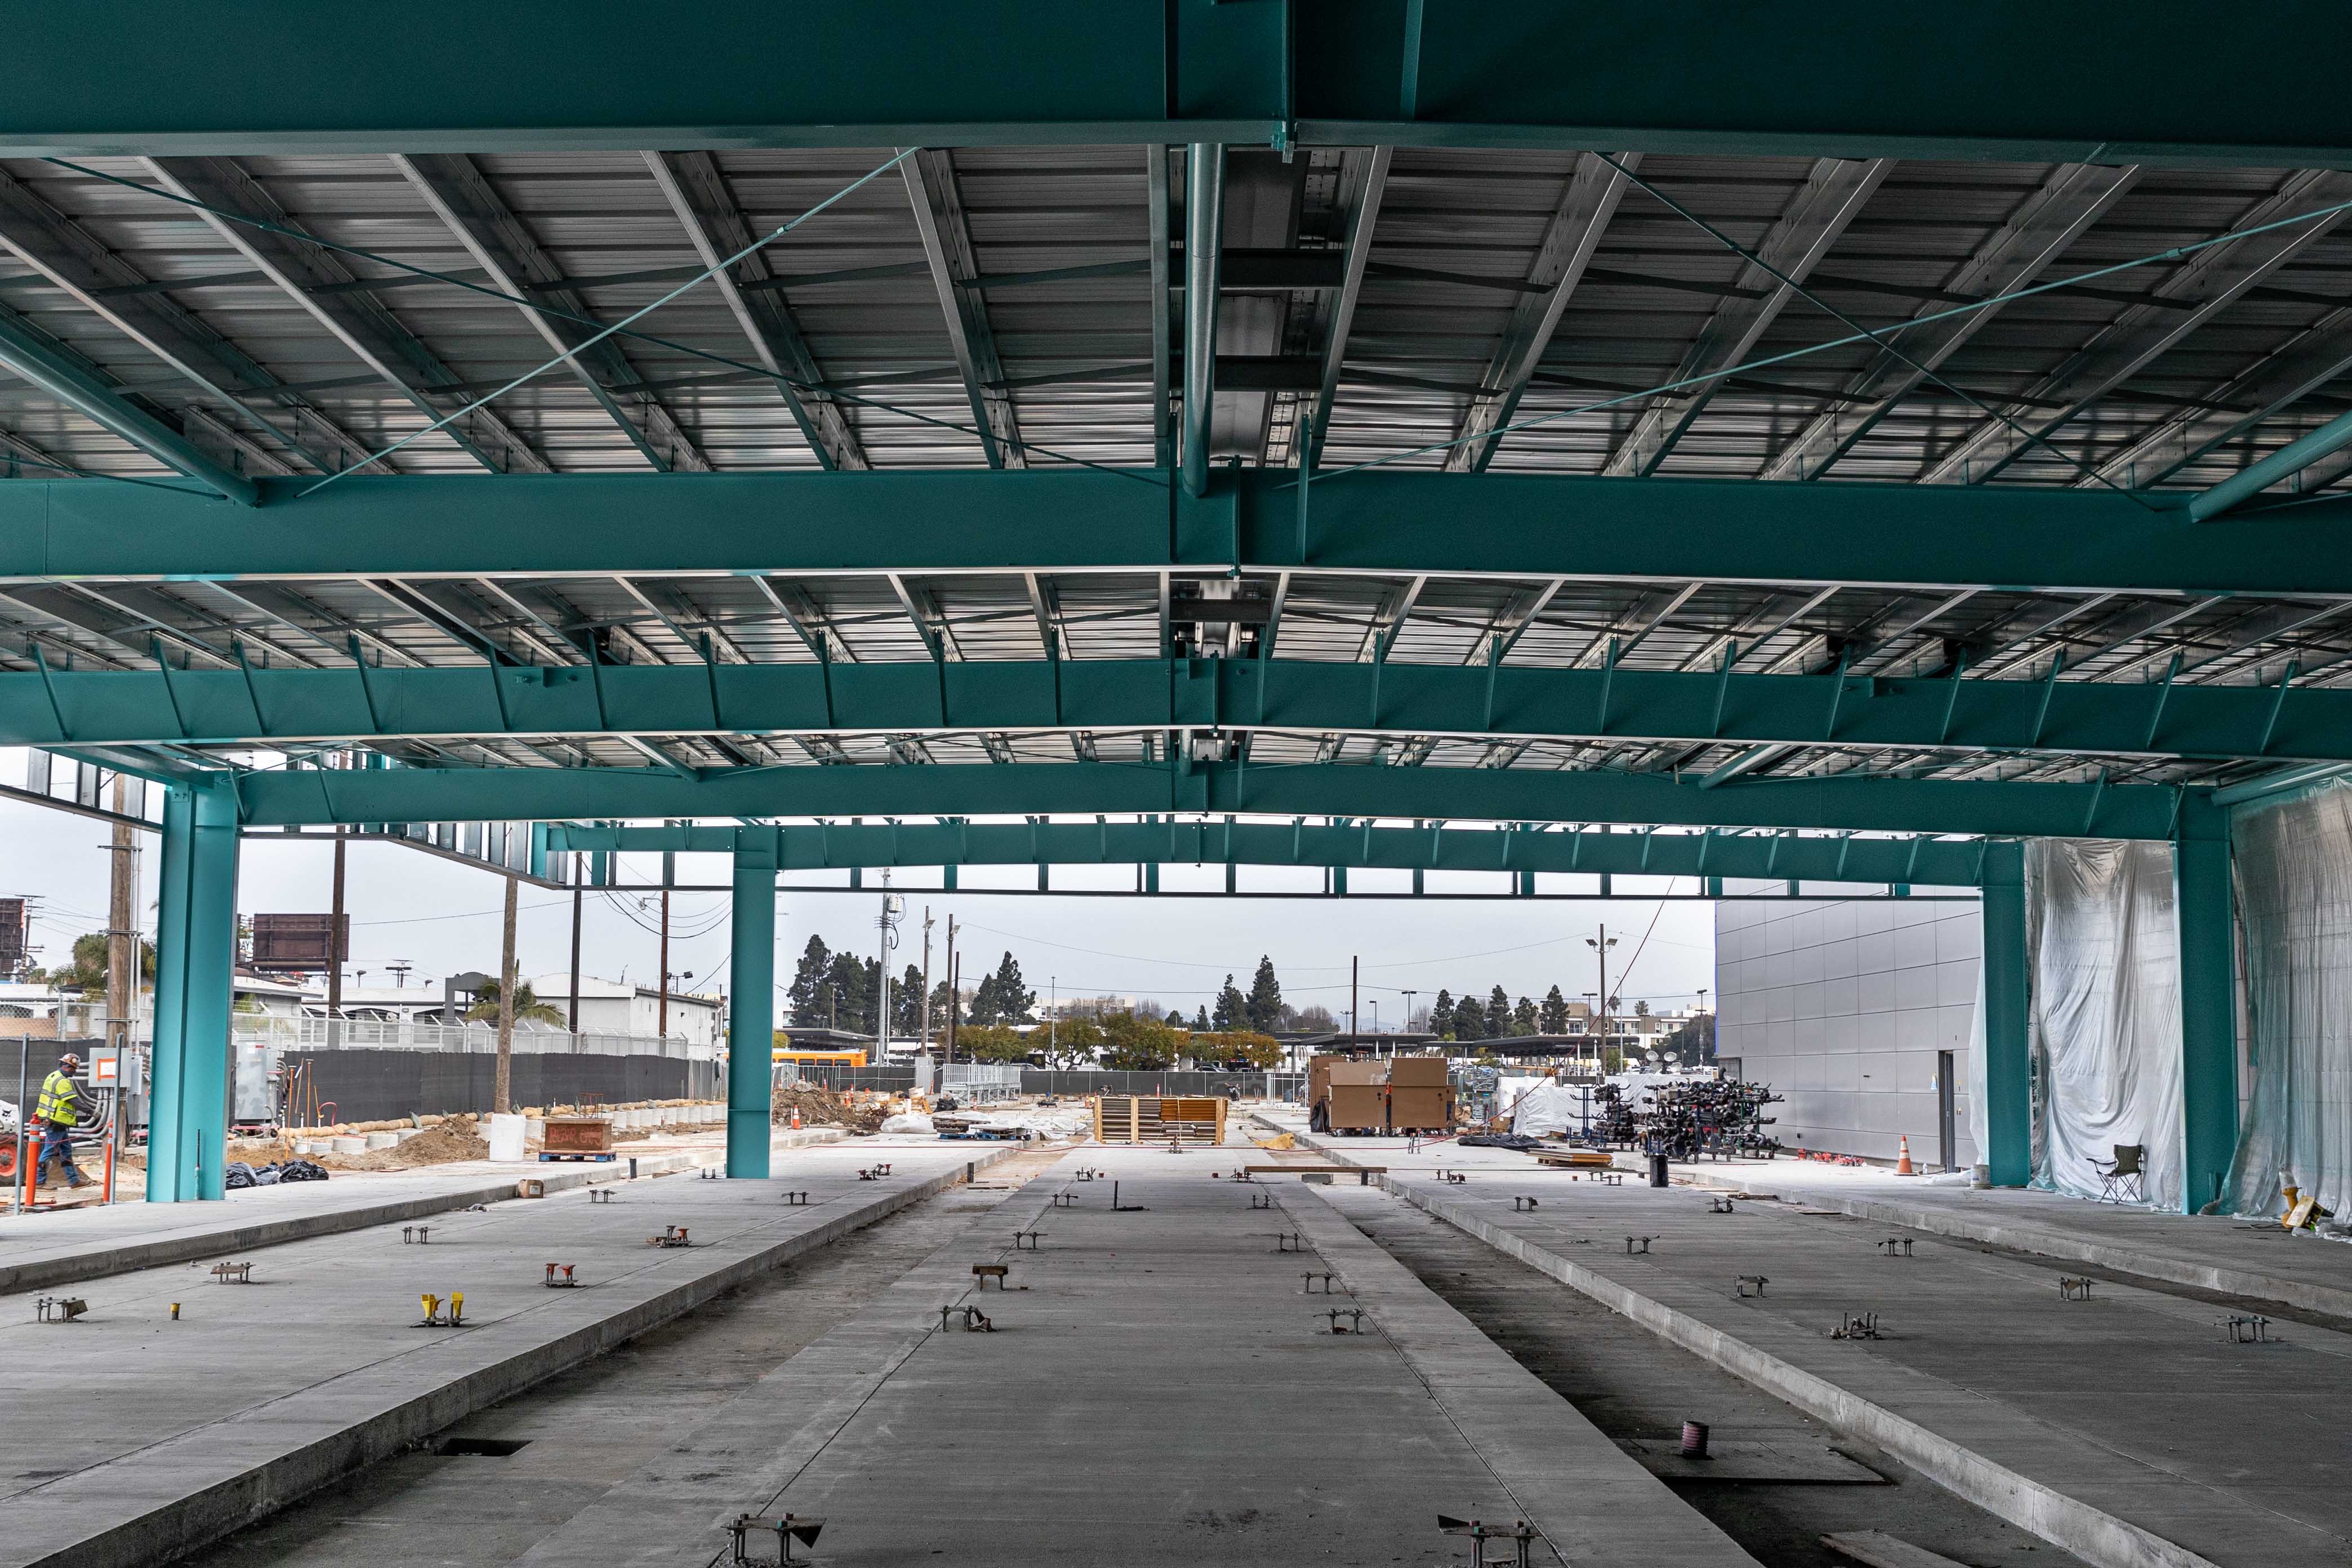 Paint application has begun on the train canopy over the storage tracks at the future APM Maintenance and Storage Facility.